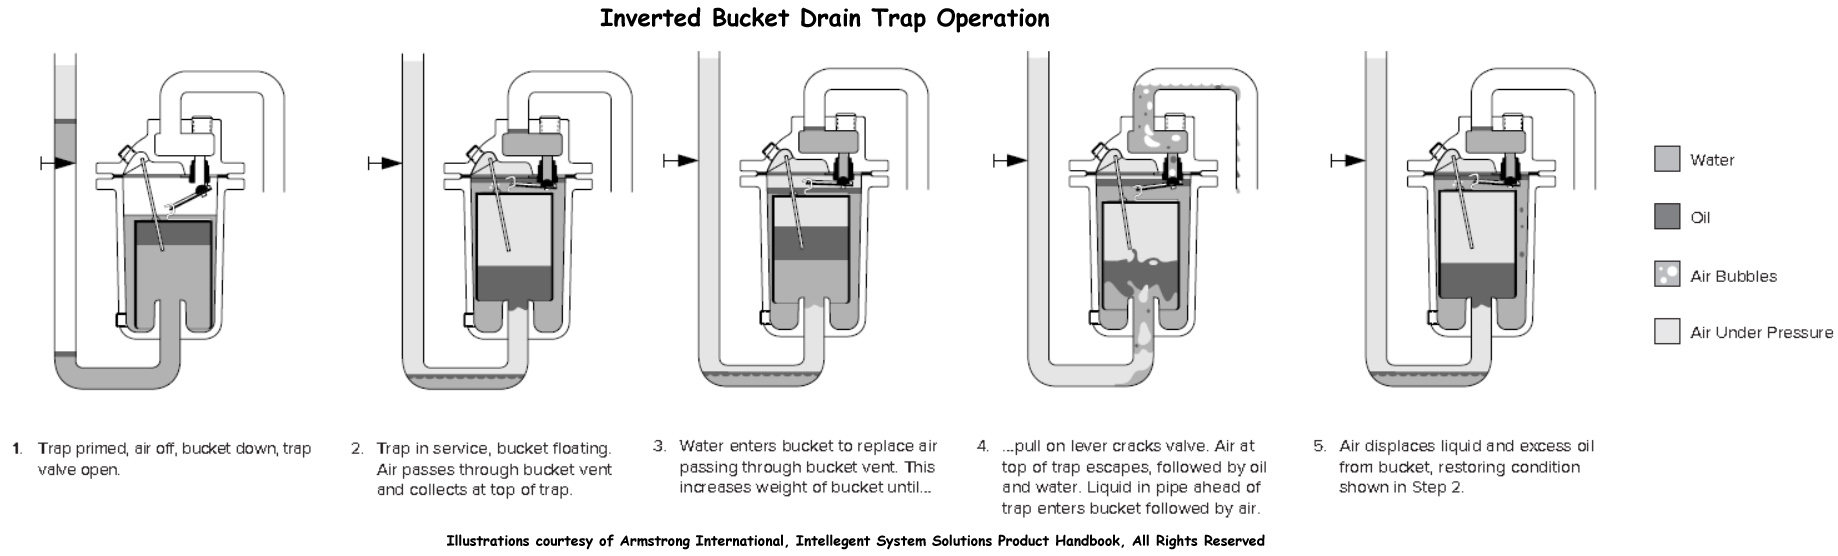 Inverted Bucket Drain Trap Operation